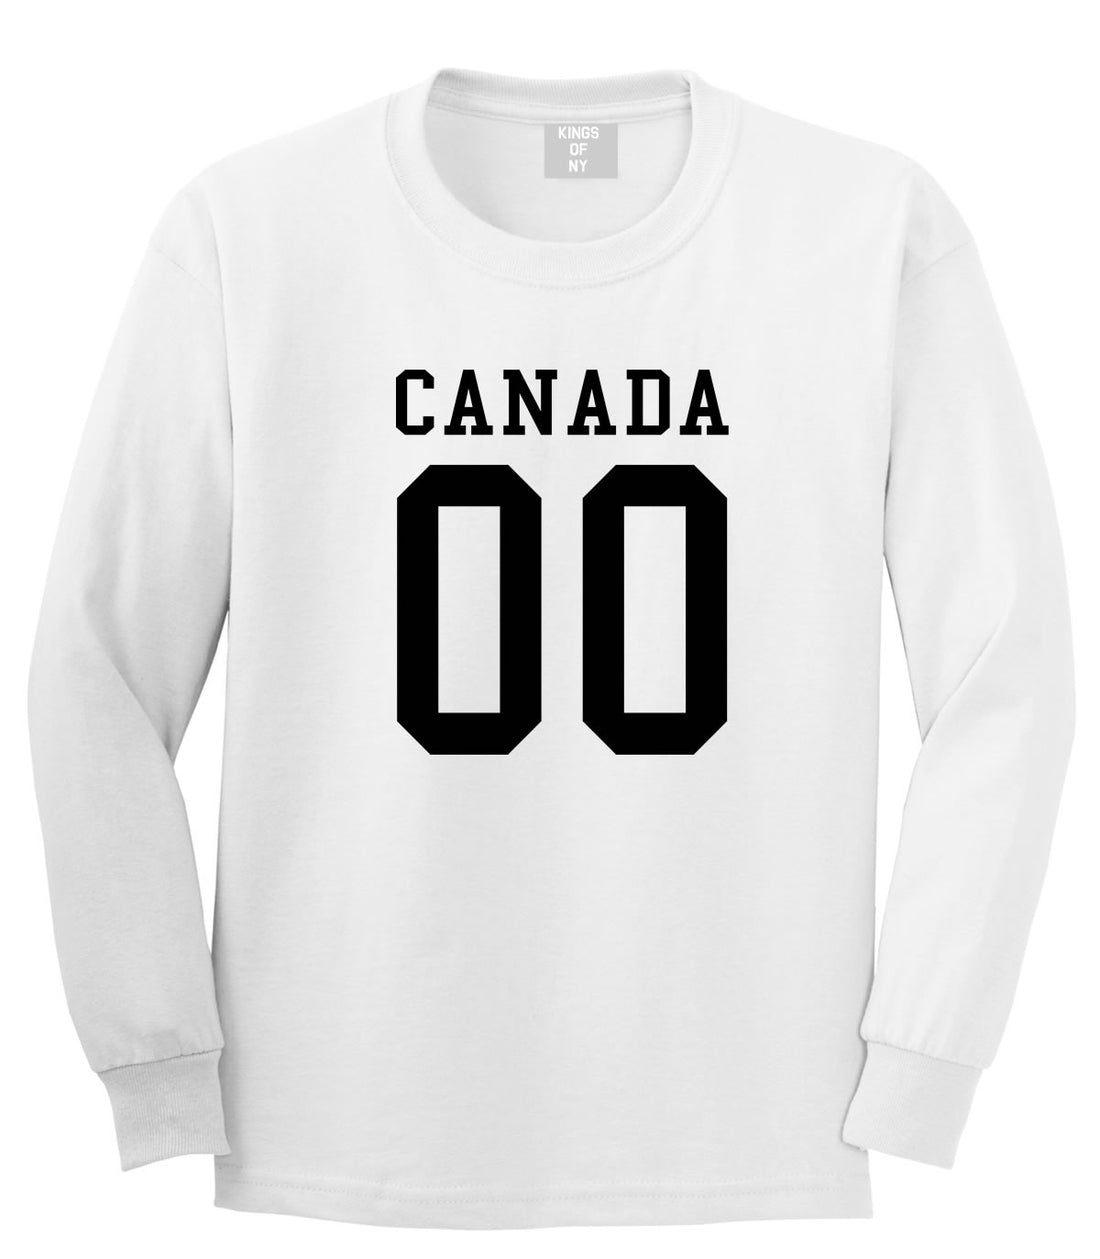 Canada Team 00 Jersey Long Sleeve T-Shirt in White By Kings Of NY